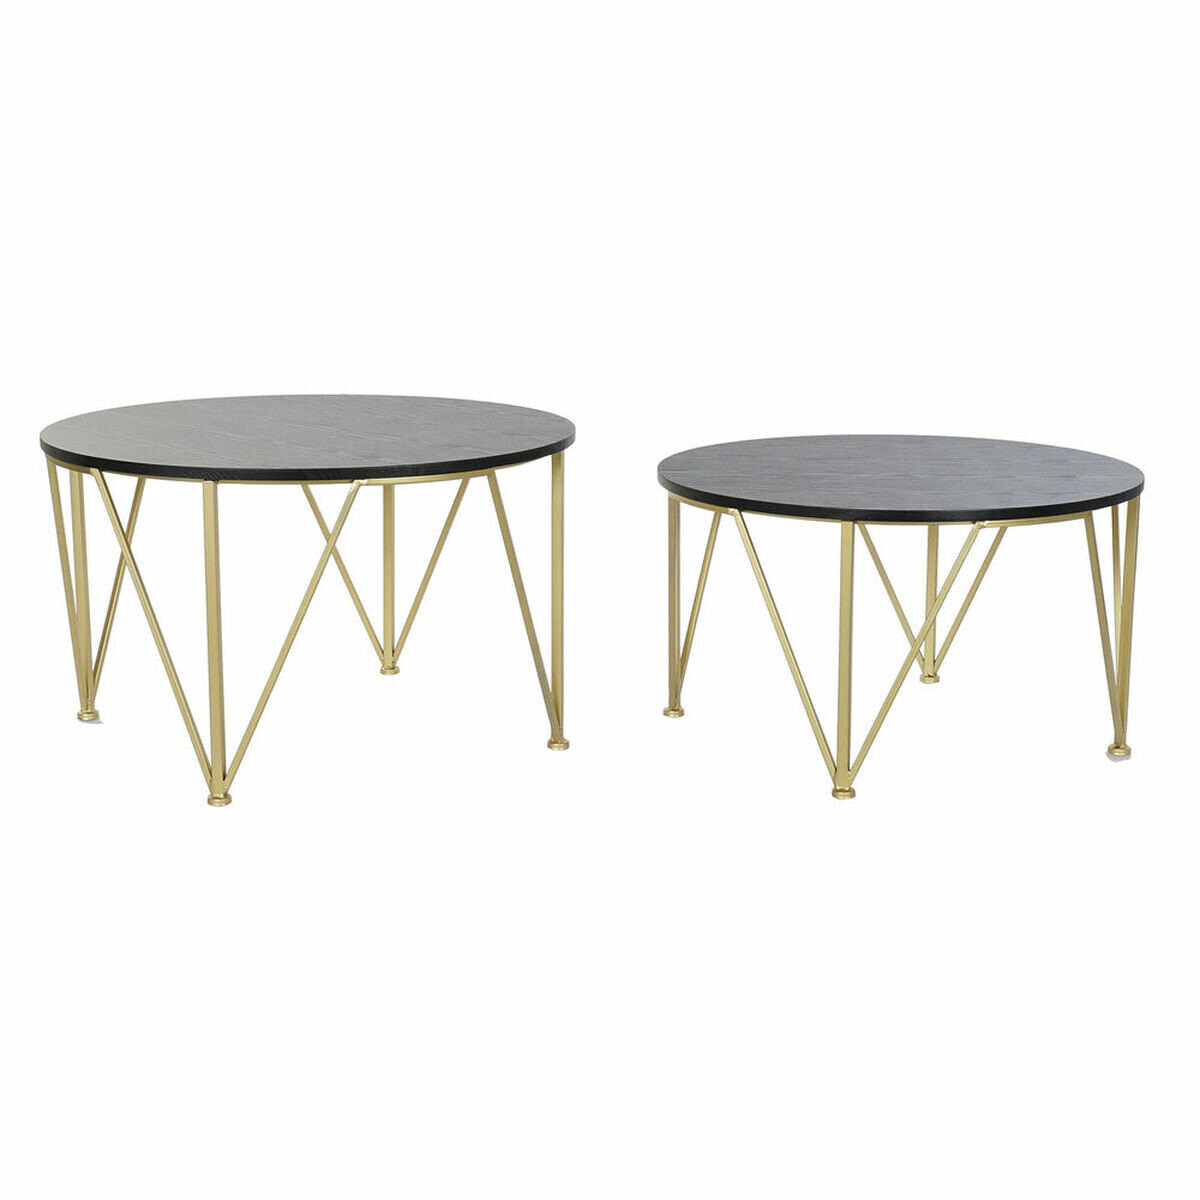 Set of 2 small tables DKD Home Decor Black Golden 79 x 79 x 46 cm